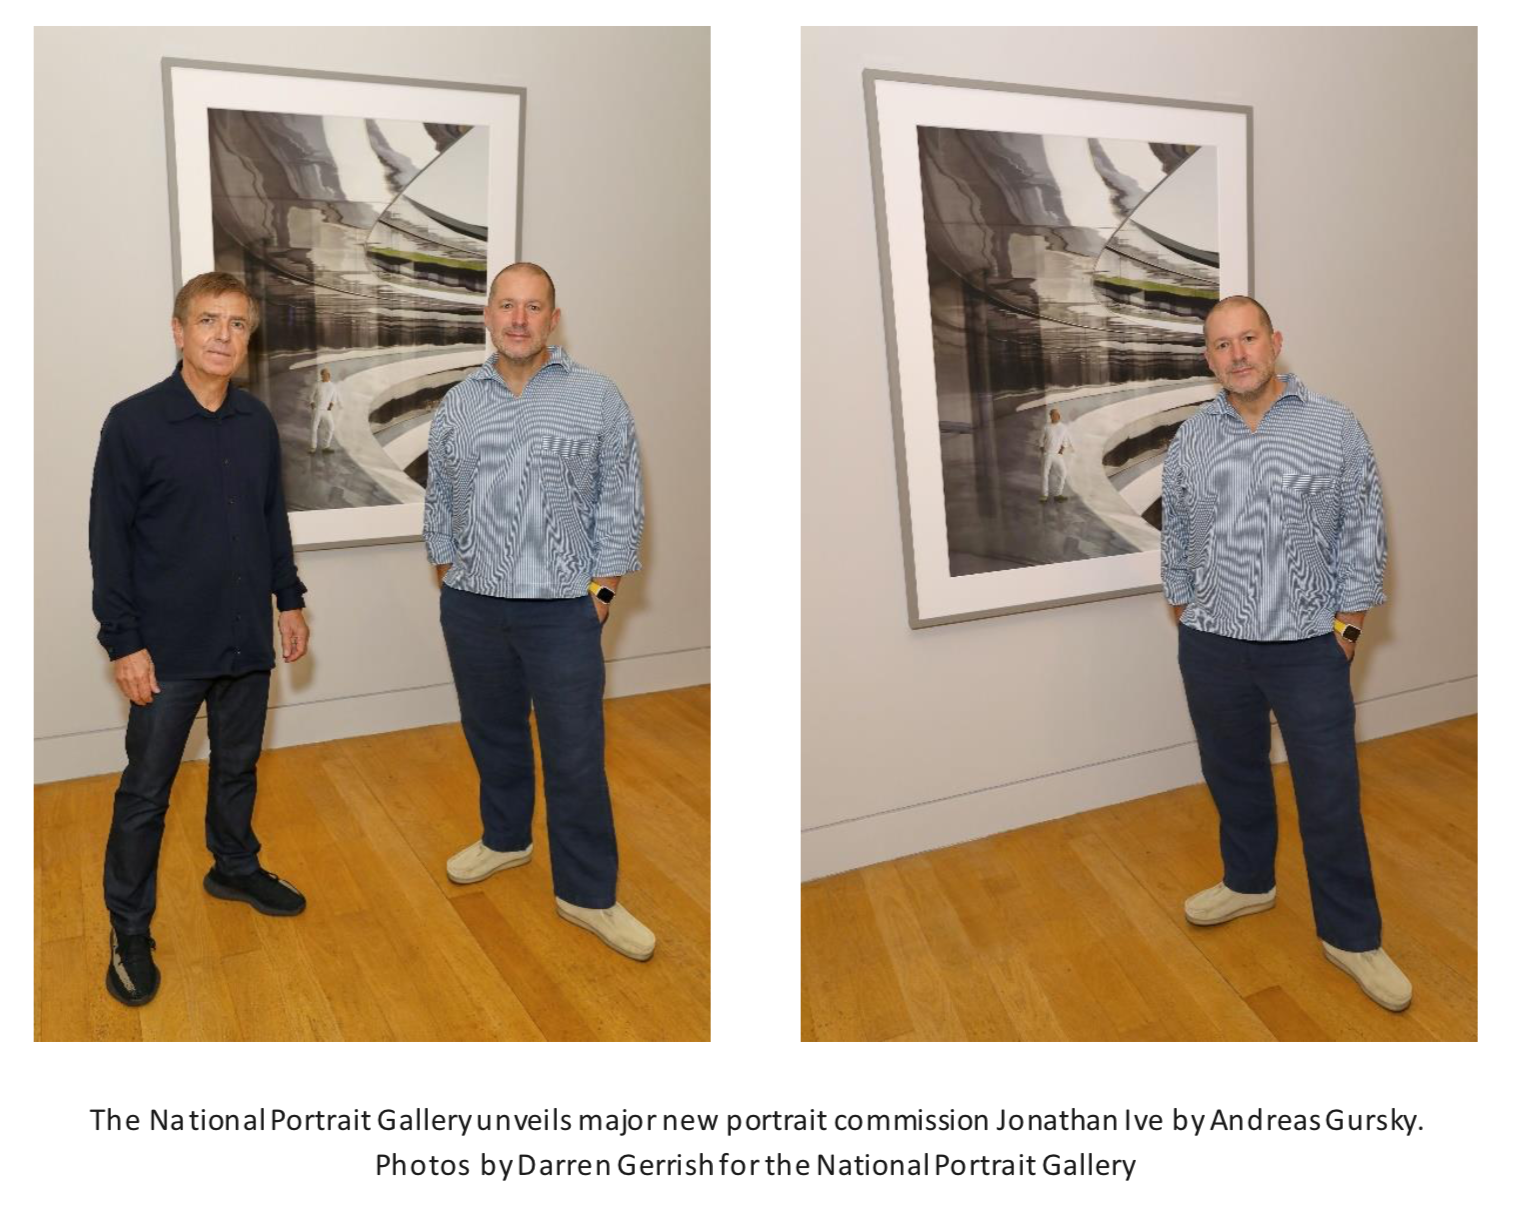 Jony Ive portrait with Andreas Gursky